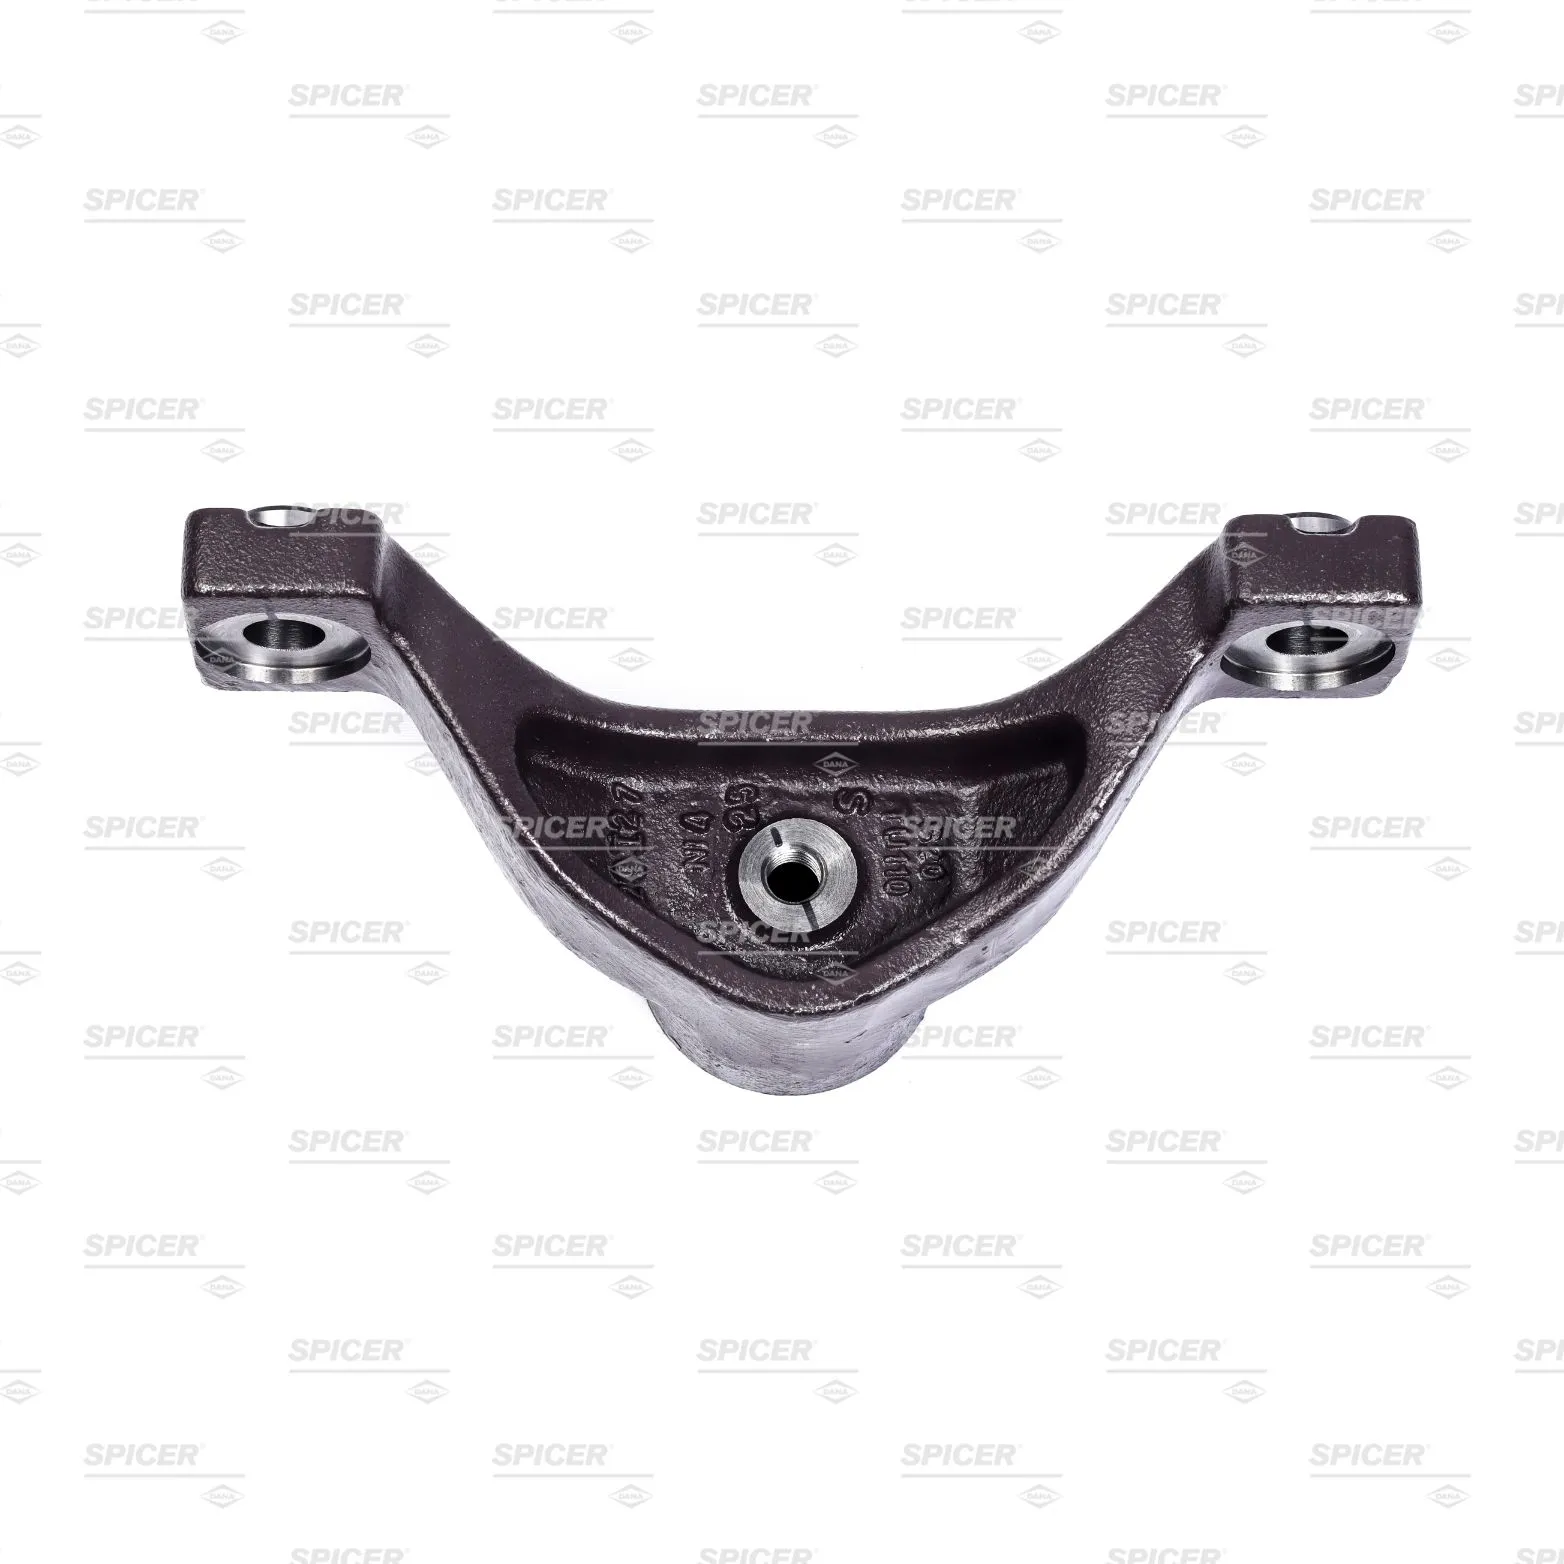 Spicer + Axle + Steering Components + Trunnion Assy - Rear + S20TU111-X_SP + online